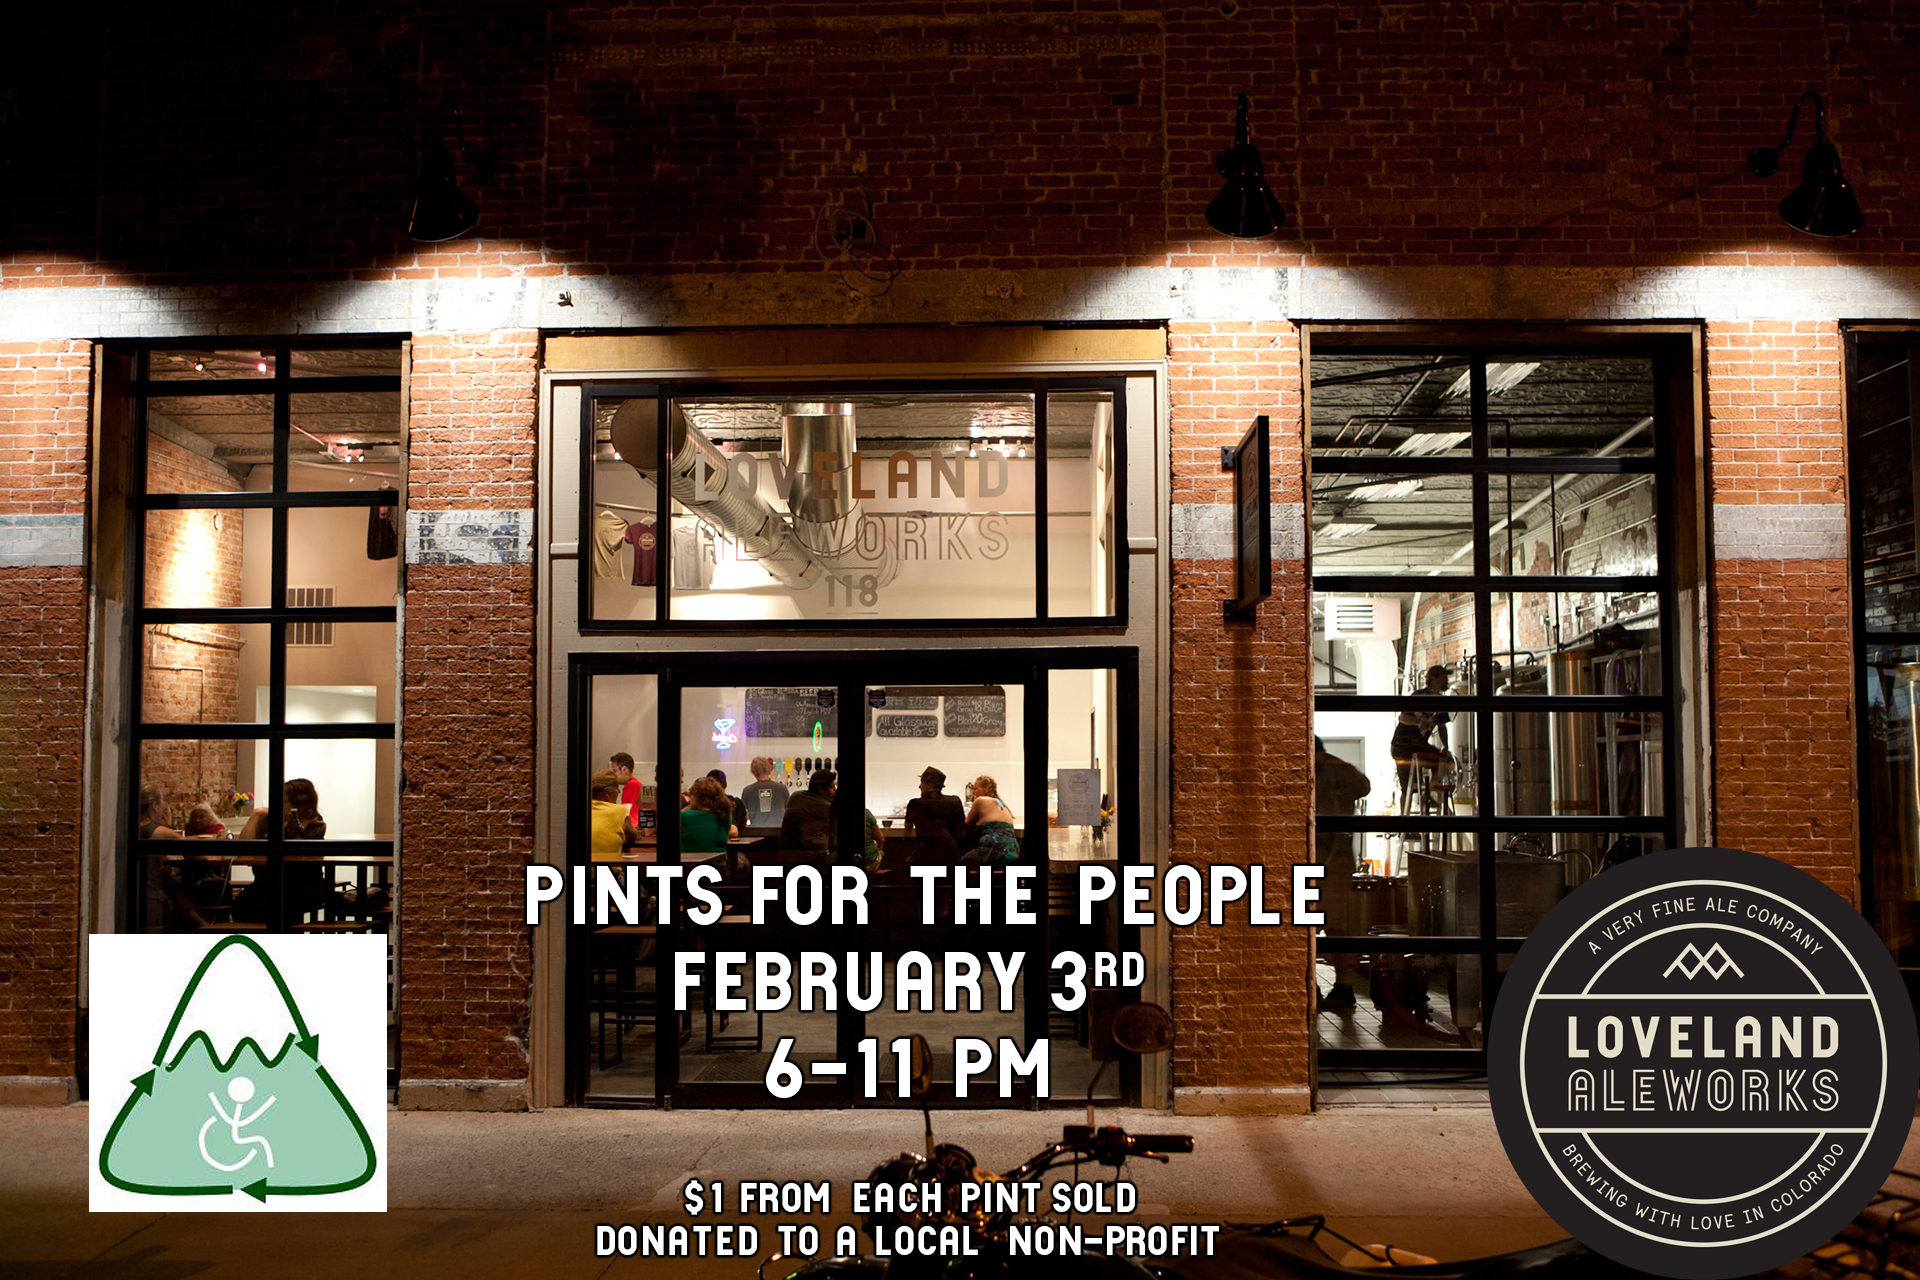 Pints For The People Good Health Will Loveland Aleworks